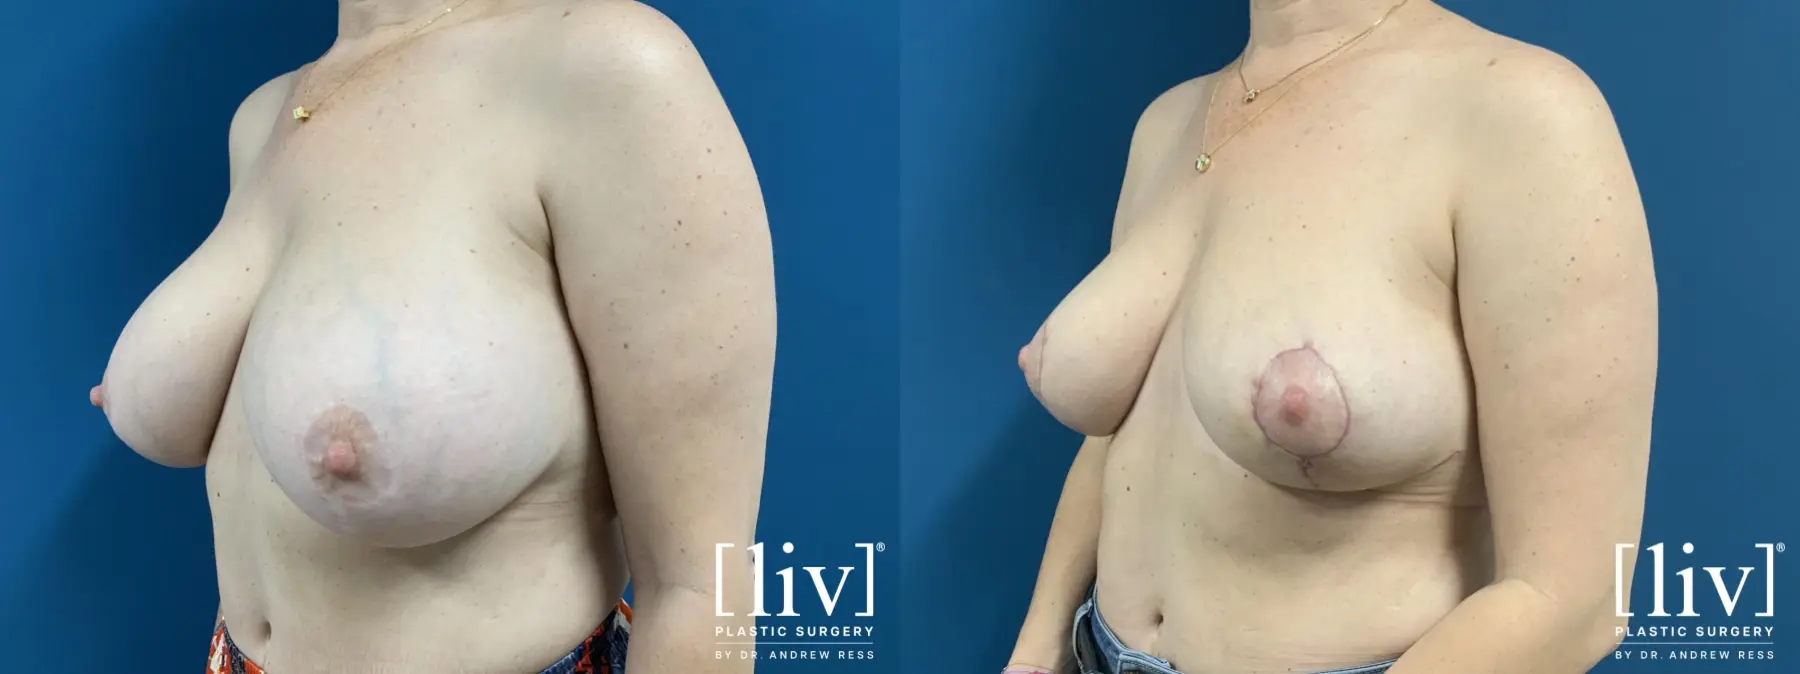 Implant removal with Breast Lift and Fat Transfer to Breast  - Before and After 2